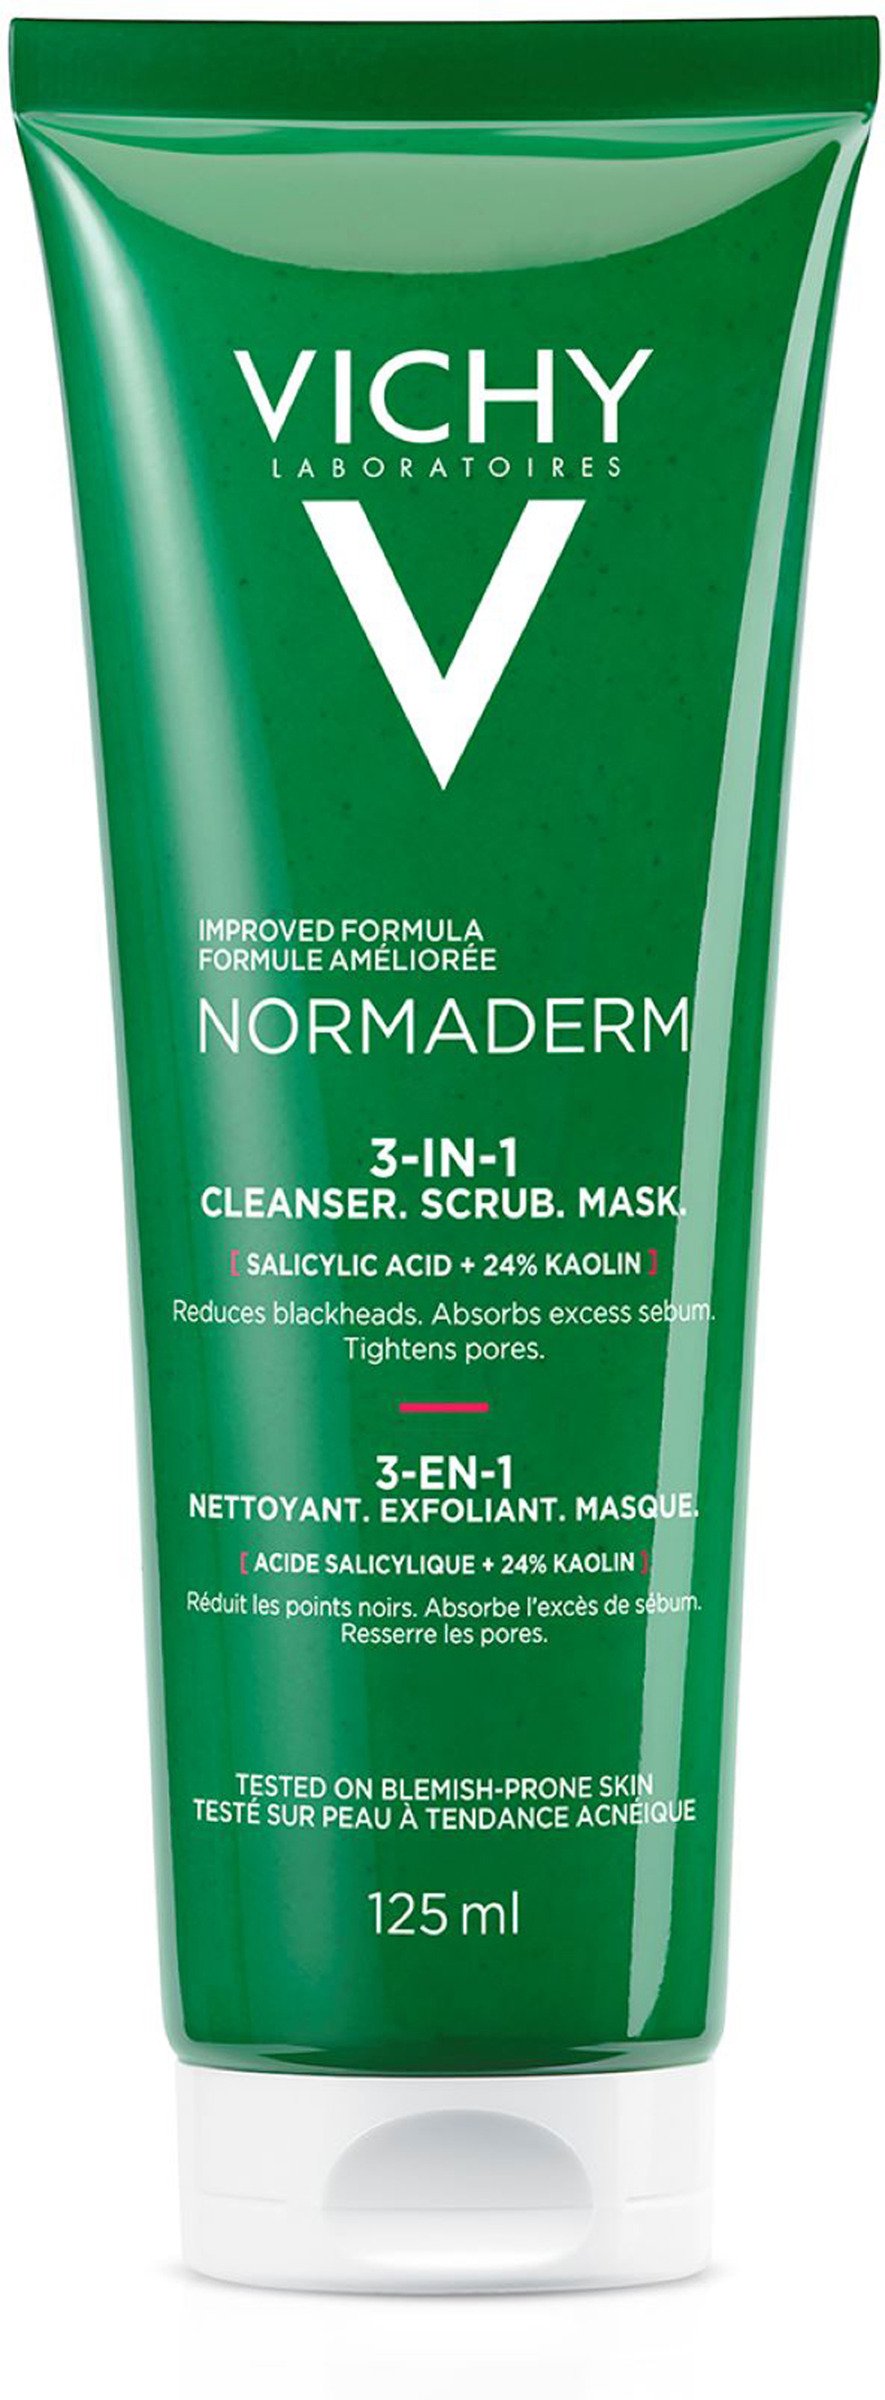 Vichy Normaderm 3-in-1 Scrub & Mask Cleanser 125 ml